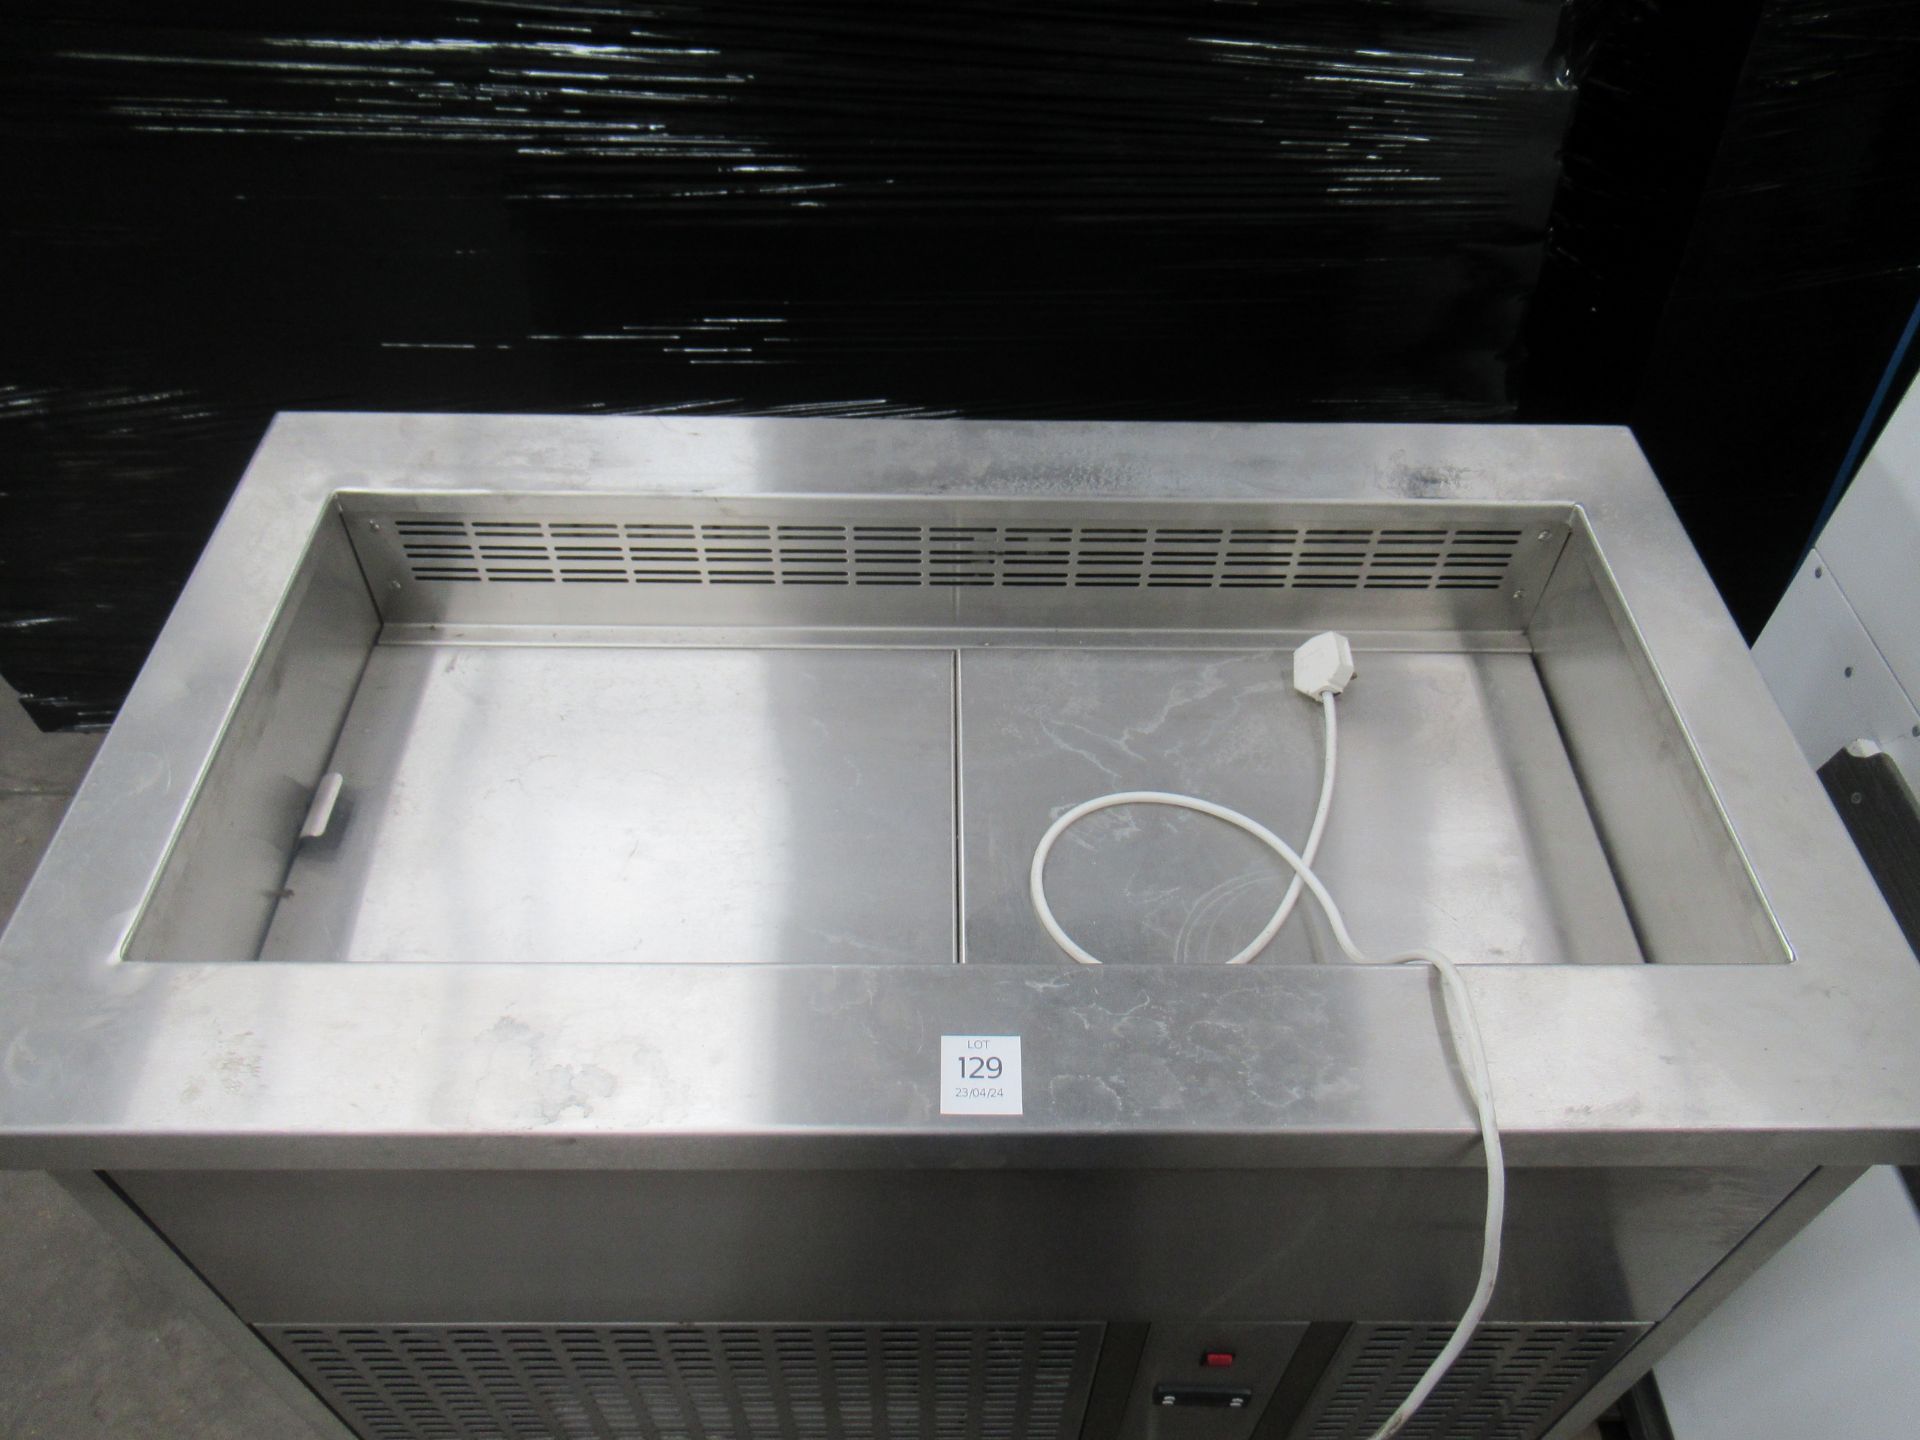 Stainless Steel Mobile Refrigerated Display Unit - Image 2 of 3